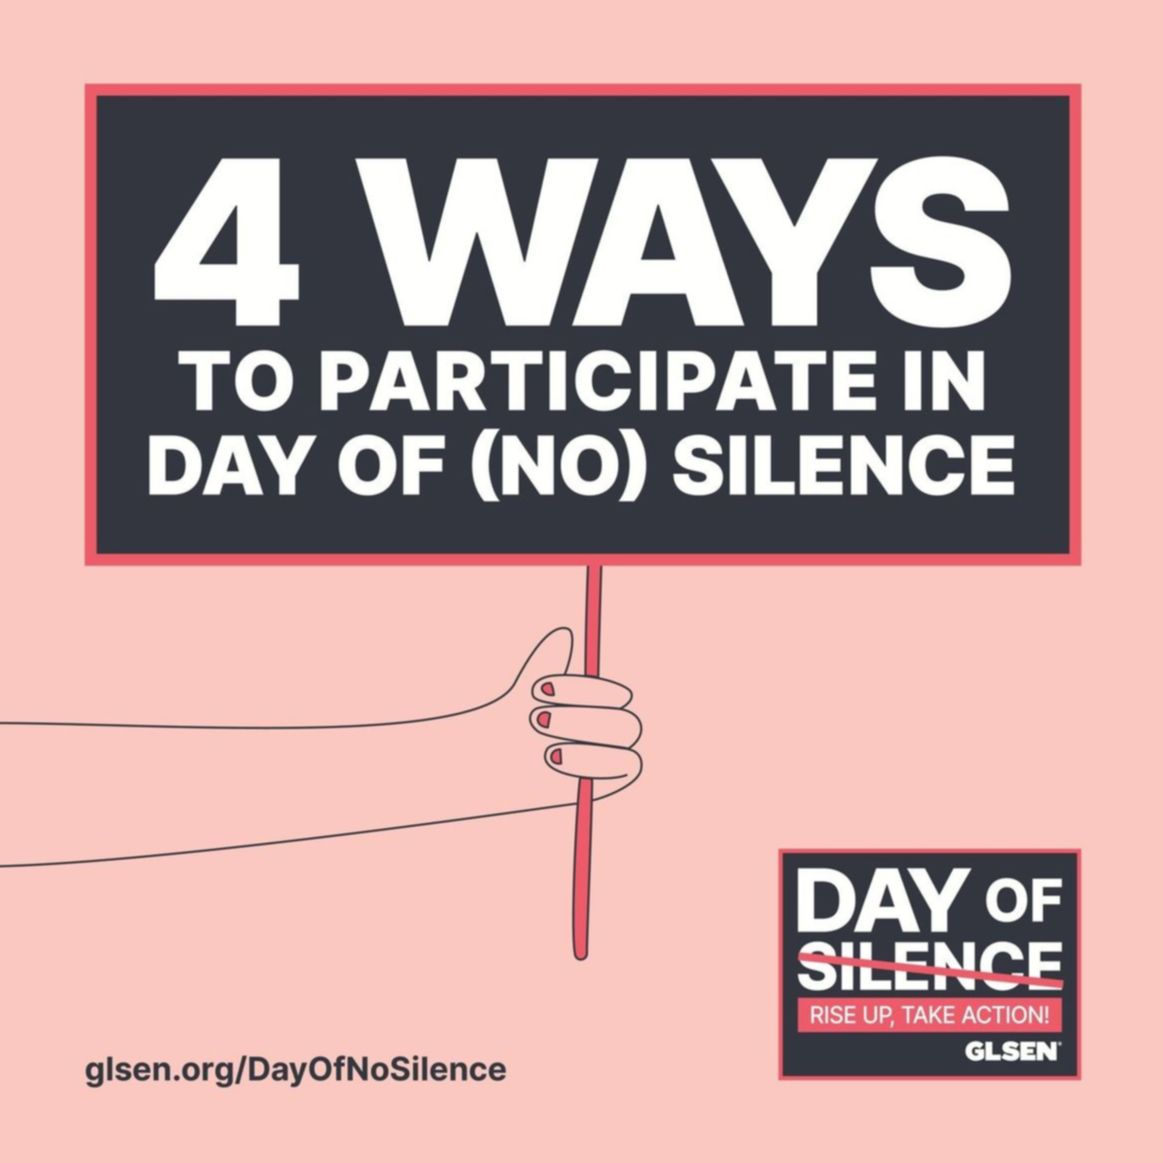 Our youth deserve better. We must #RiseUp4LGBTQ youth and work toward building a world where young people can attend school without harassment or discrimination. #DayofNOSilence @glsen 🧵